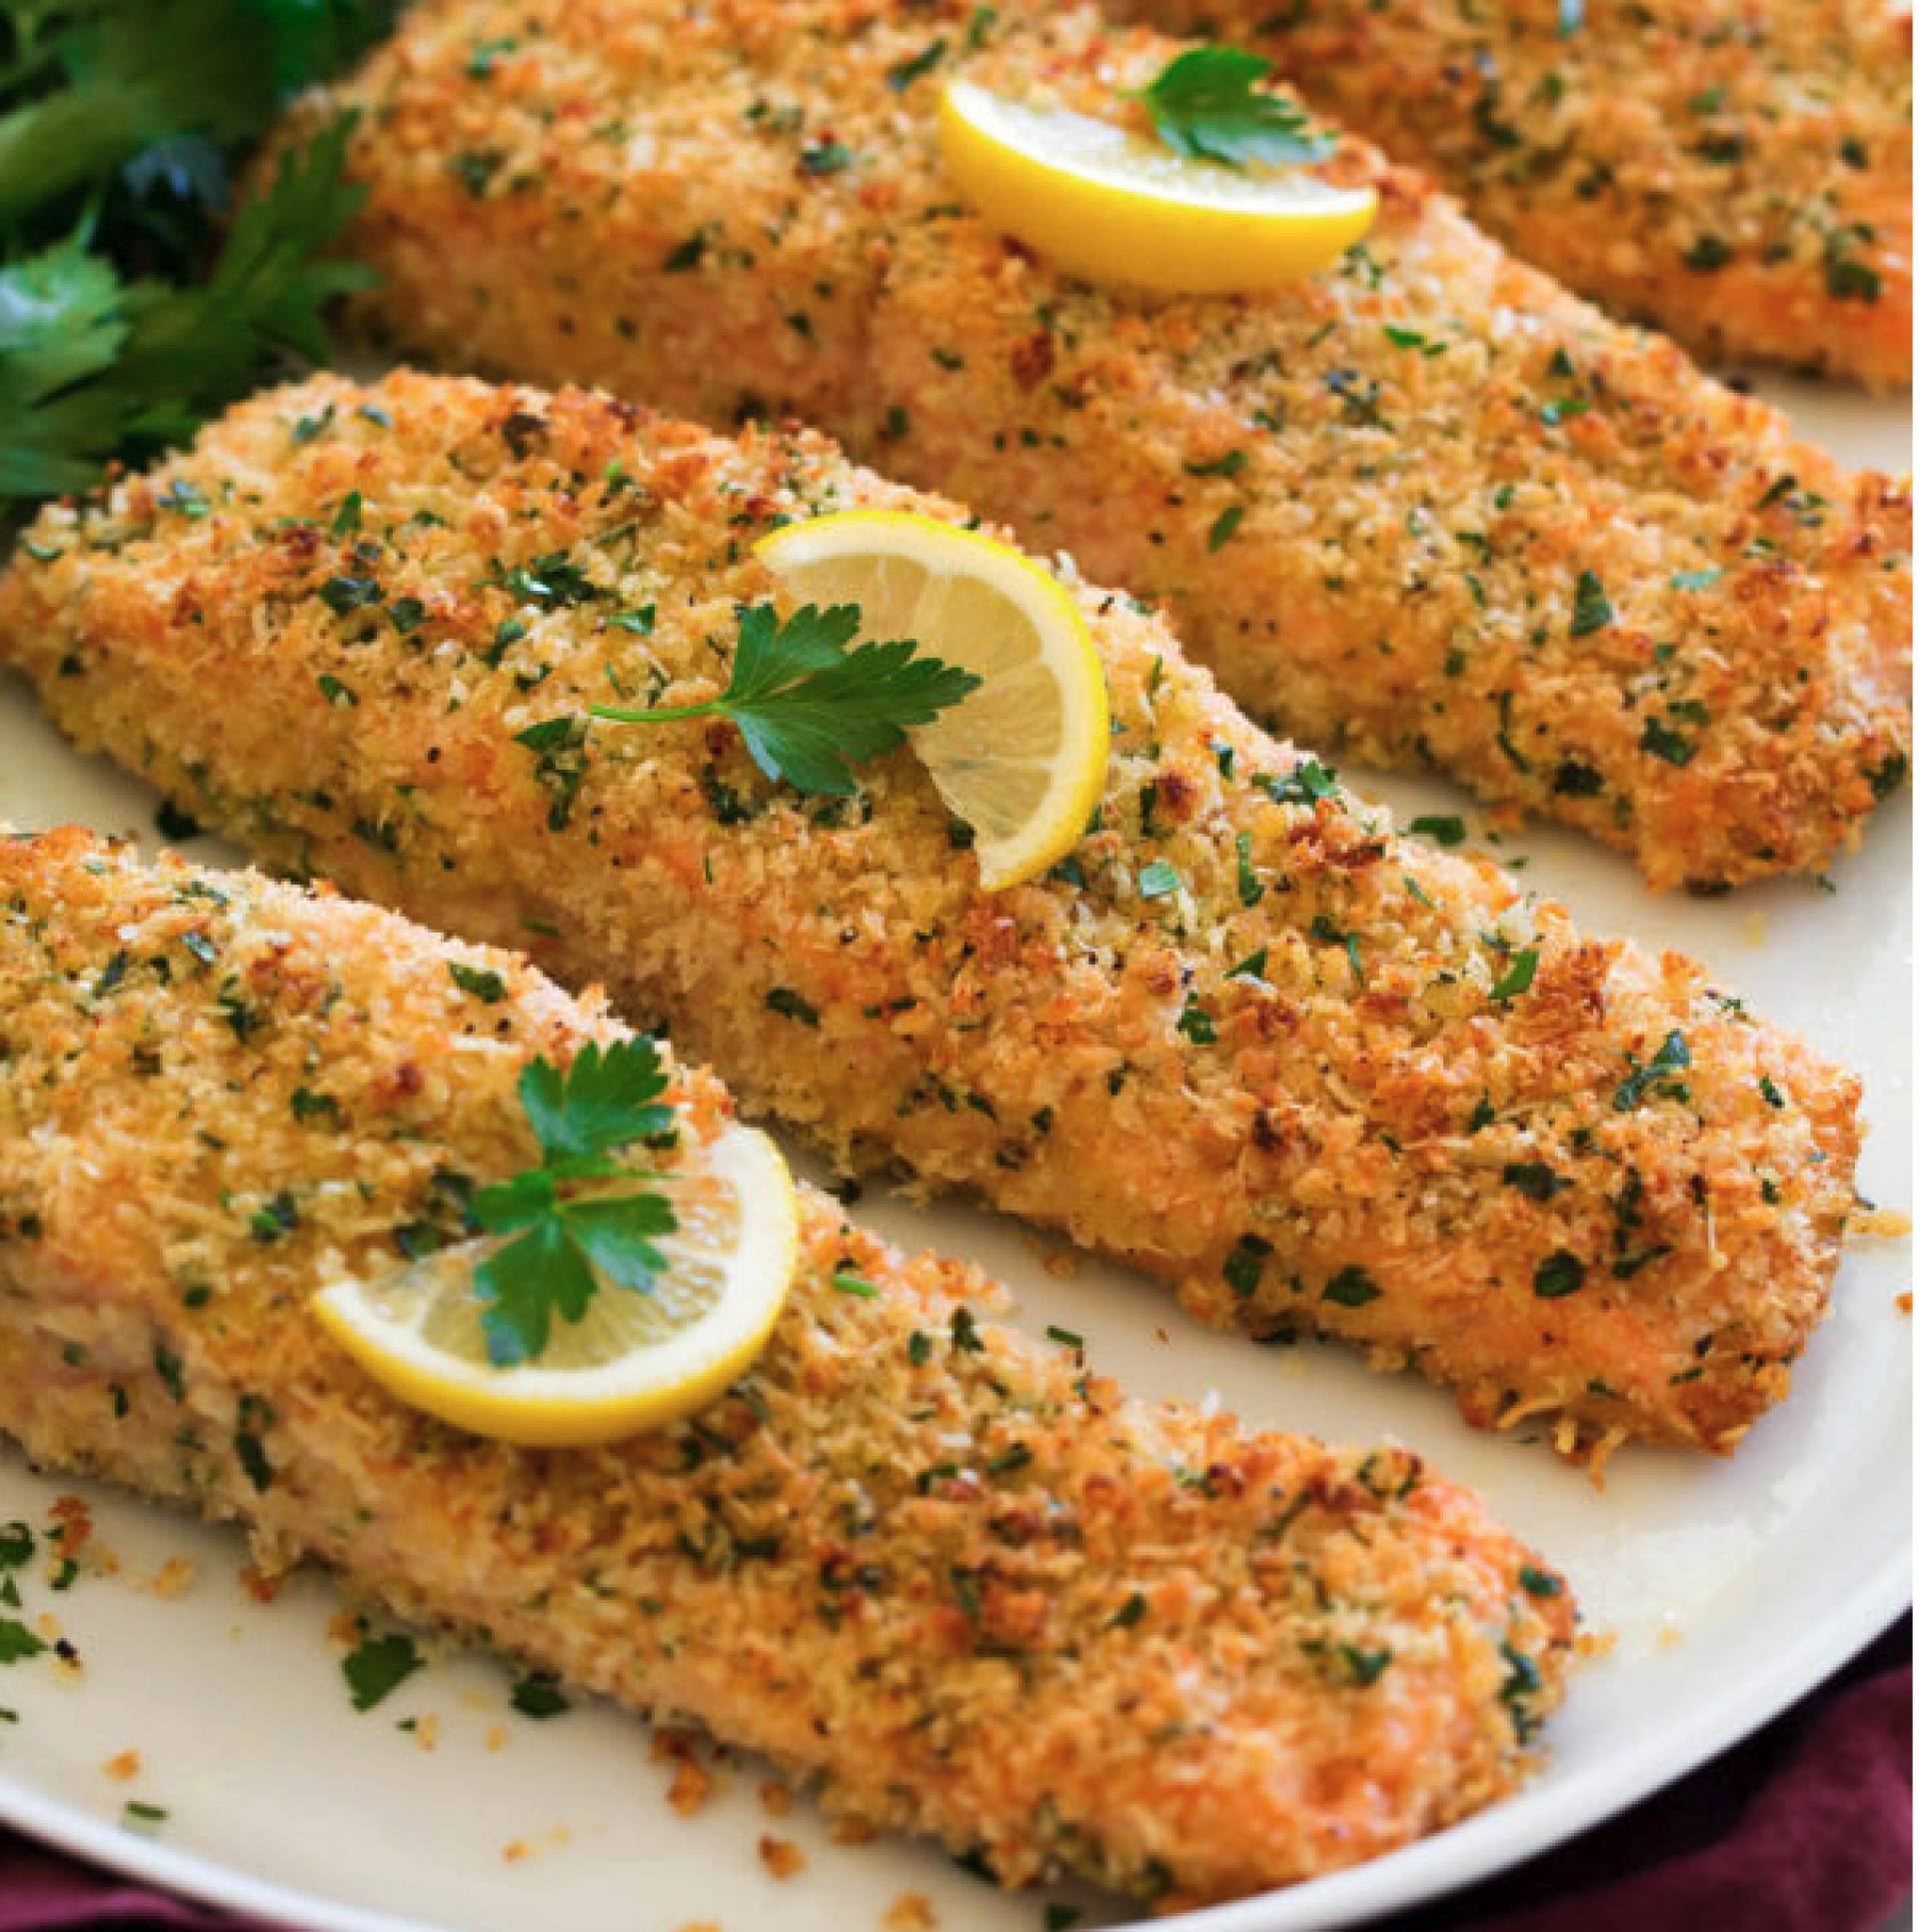 Baked Parmesan Herb Crusted Salmon (LOW CARB)